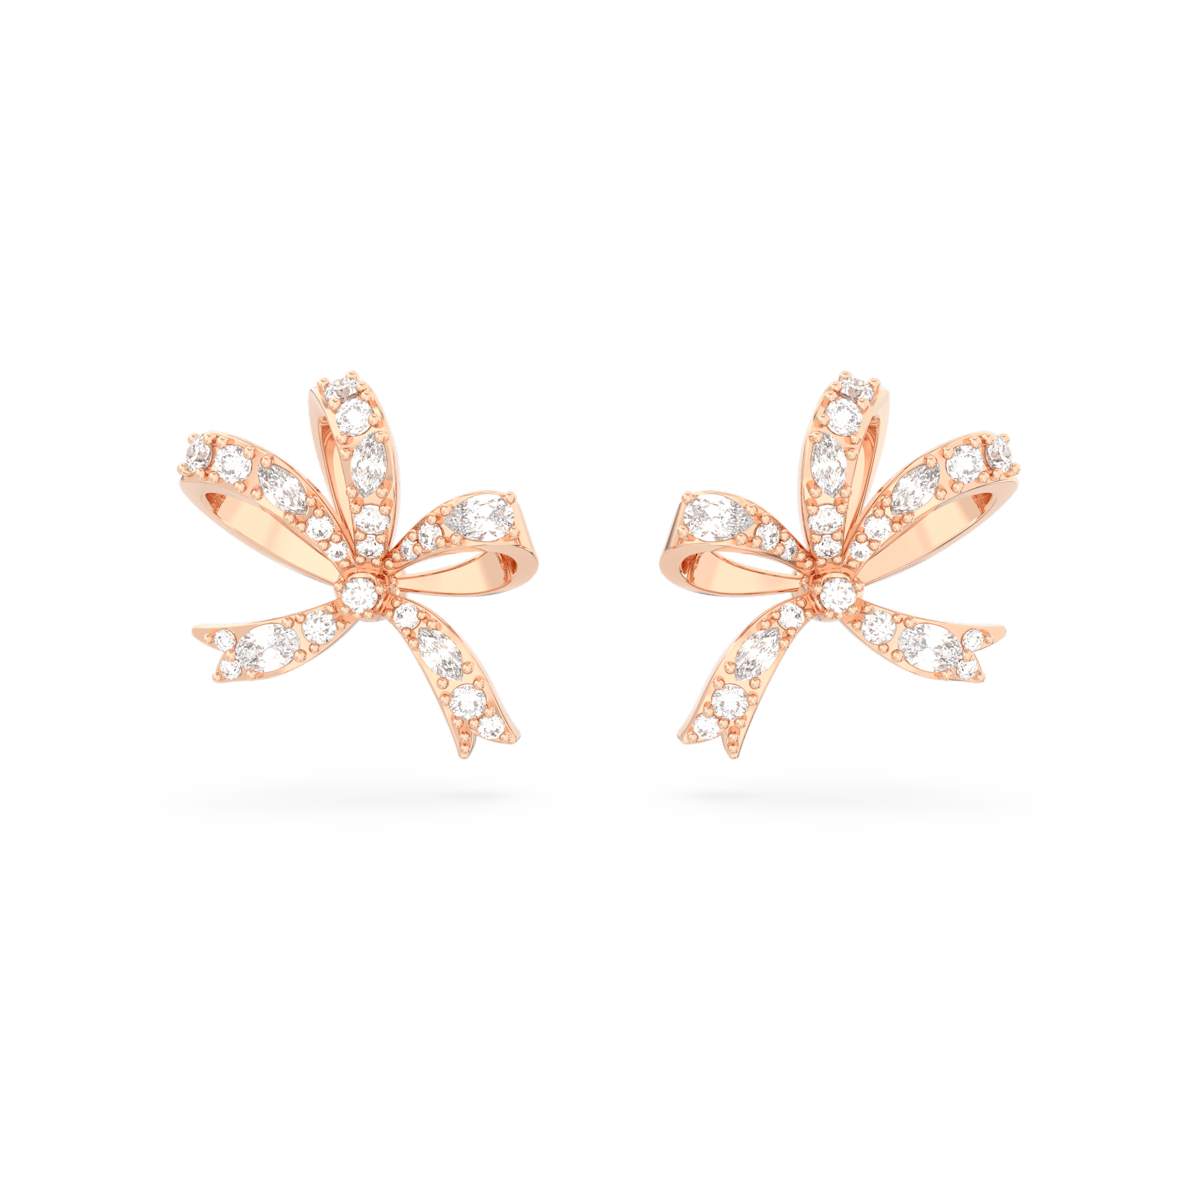 Volta stud earrings, Bow, Small, White, Rose gold-tone plated